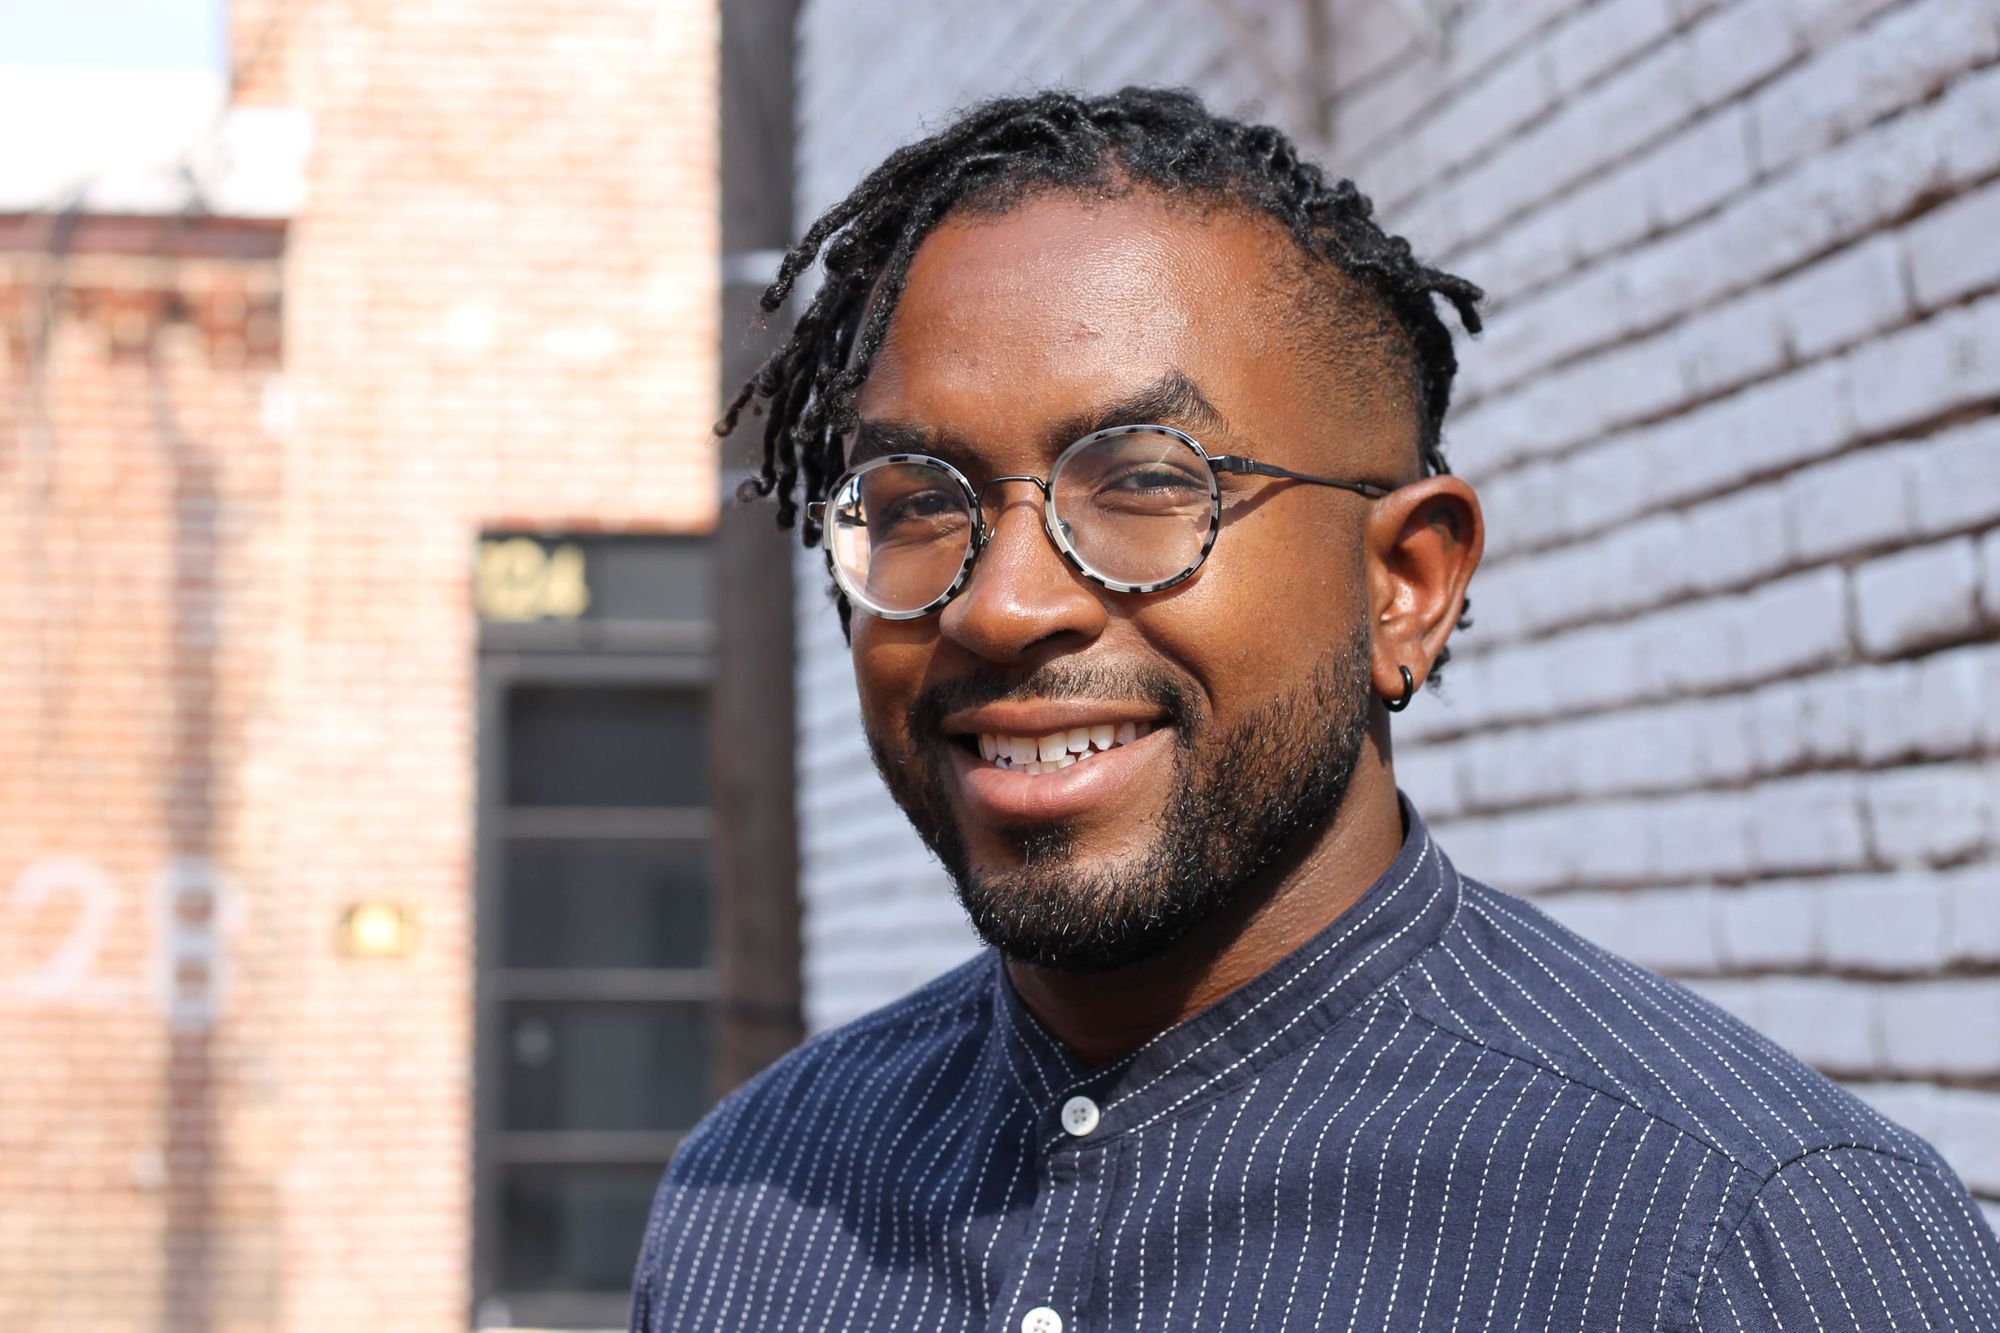 This millennial has a solution for Black storefront businesses